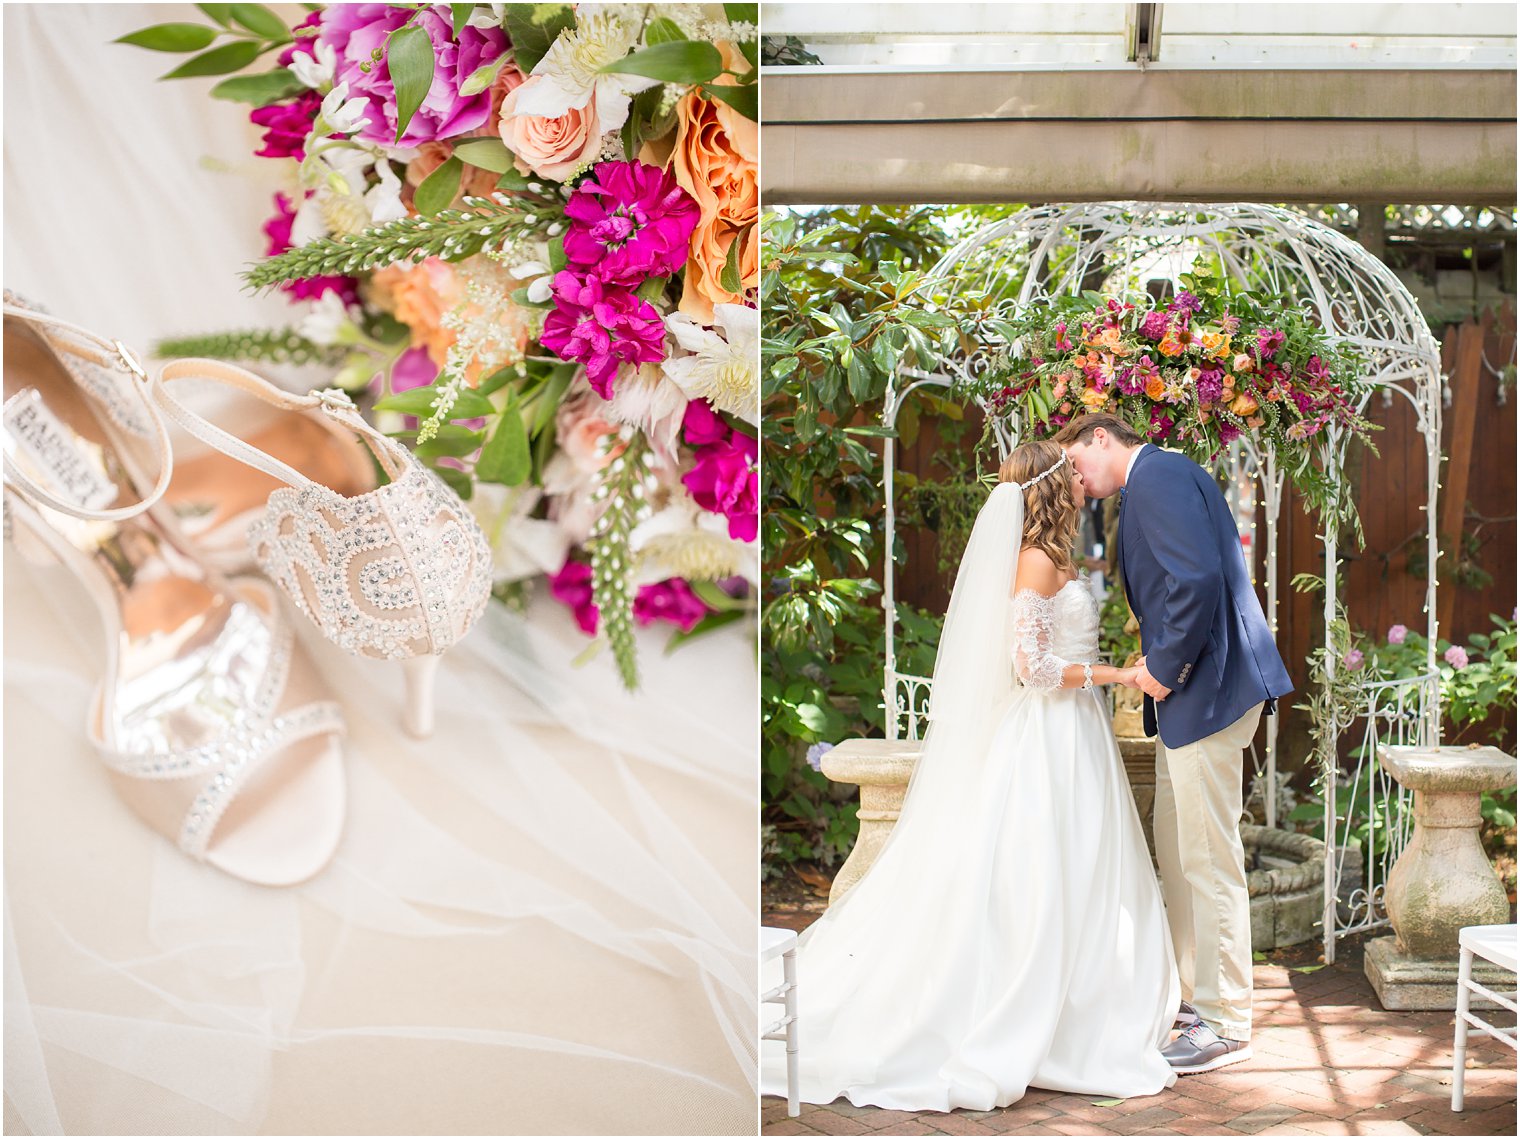 The Gables Wedding Inspiration in Beach Haven, NJ